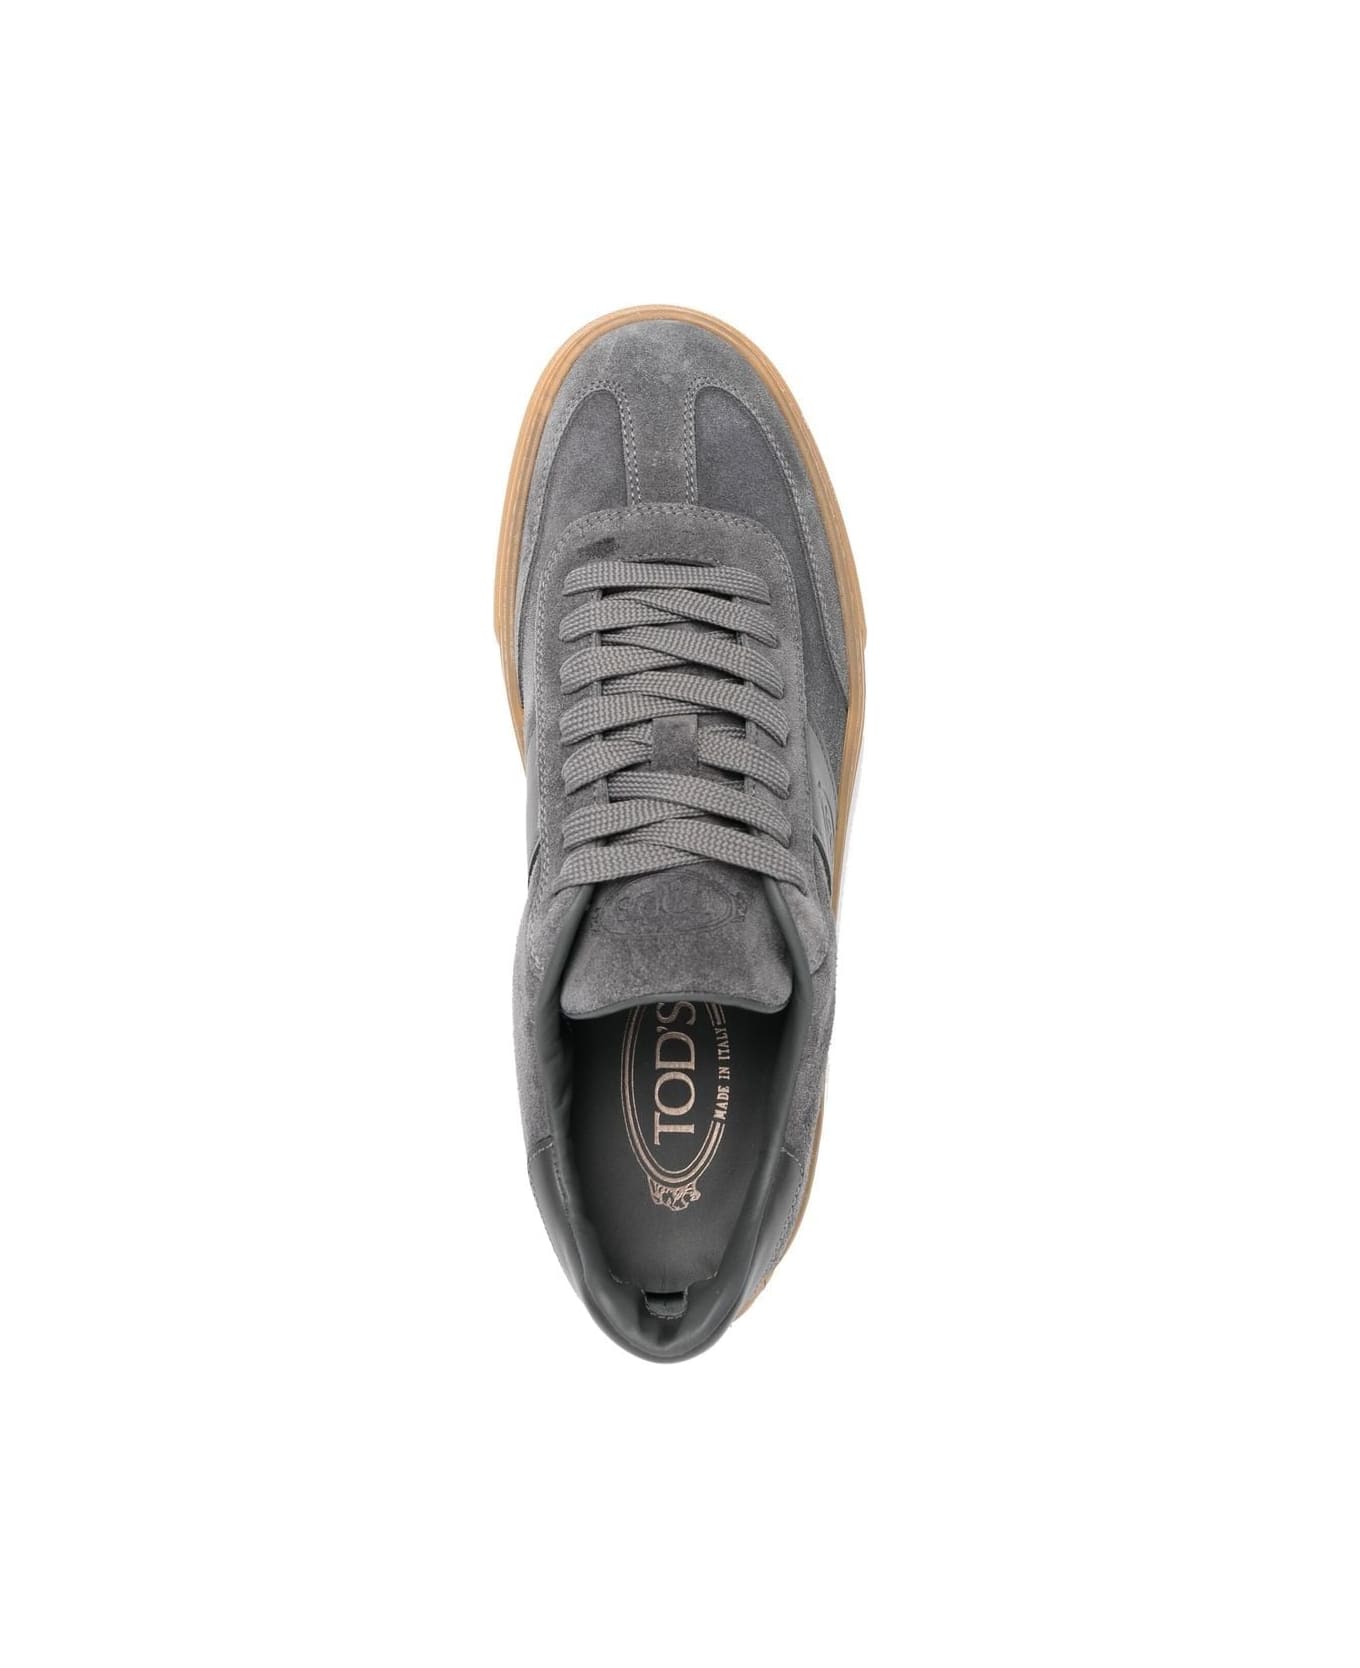 Tod's 03e Casual Lace Up Shoes - Tar